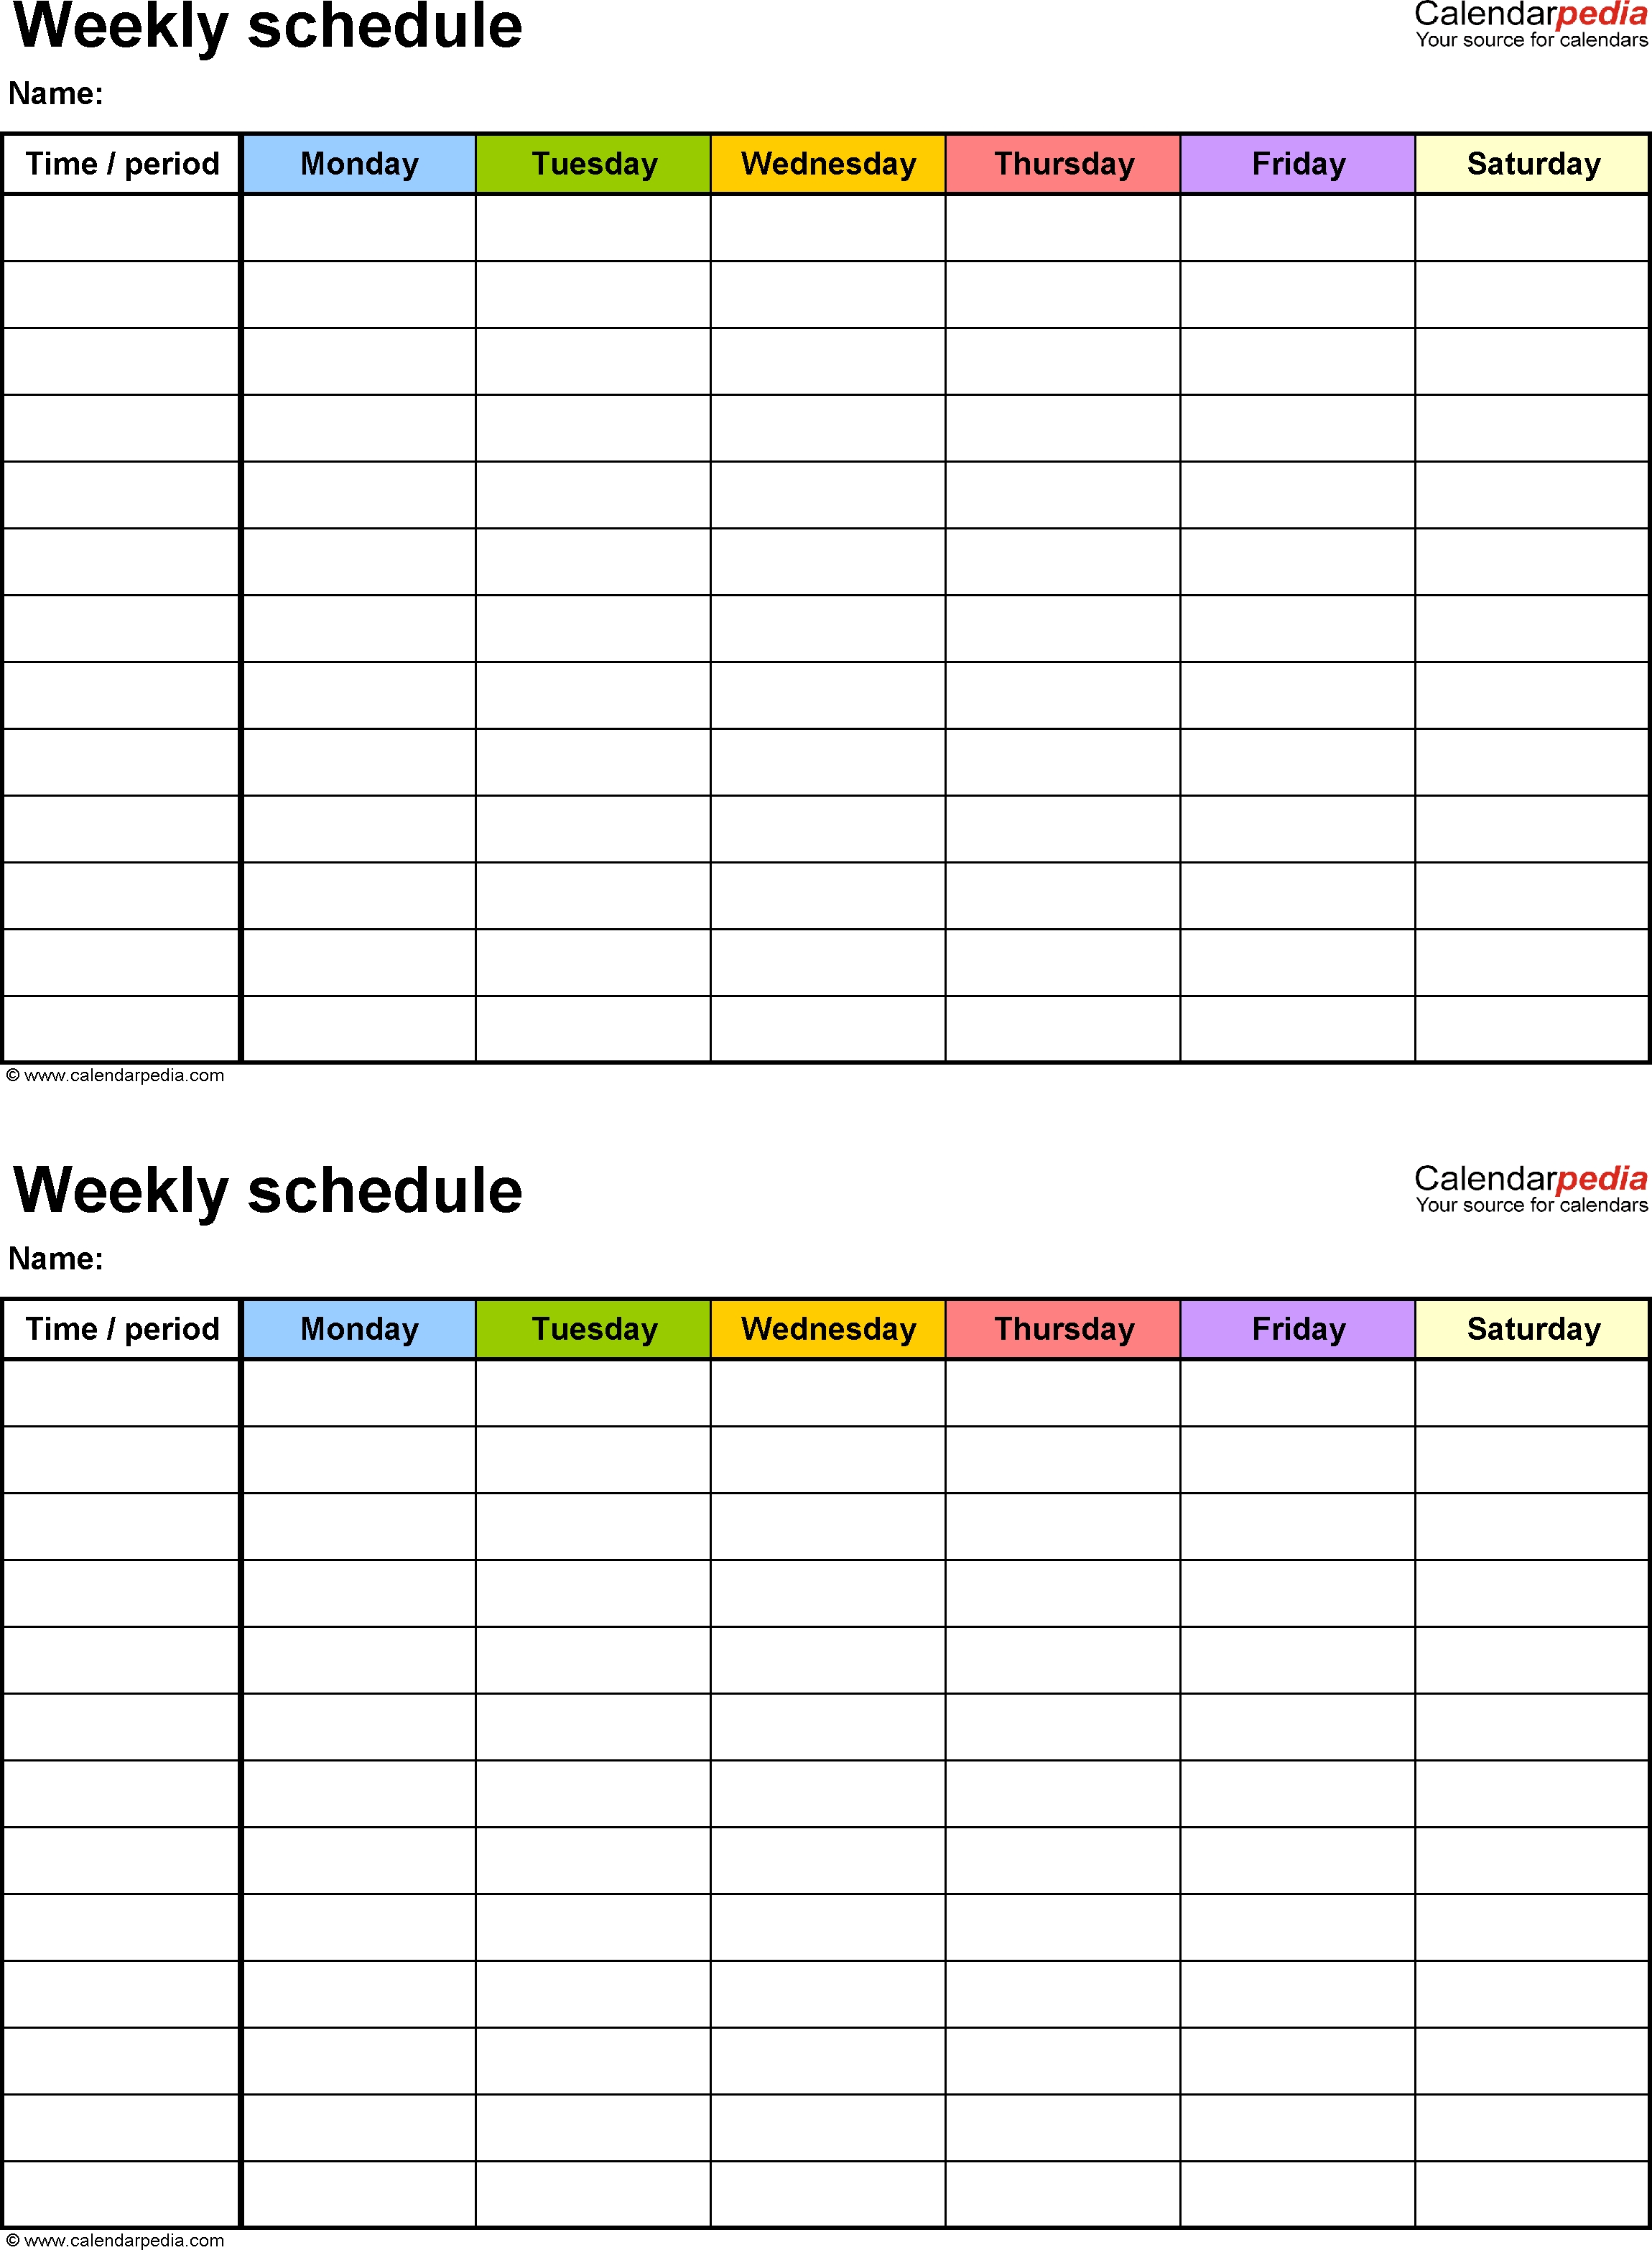 Free Weekly Schedule Templates For Pdf - 18 Templates for Blank Weekly Schedule Template Printable